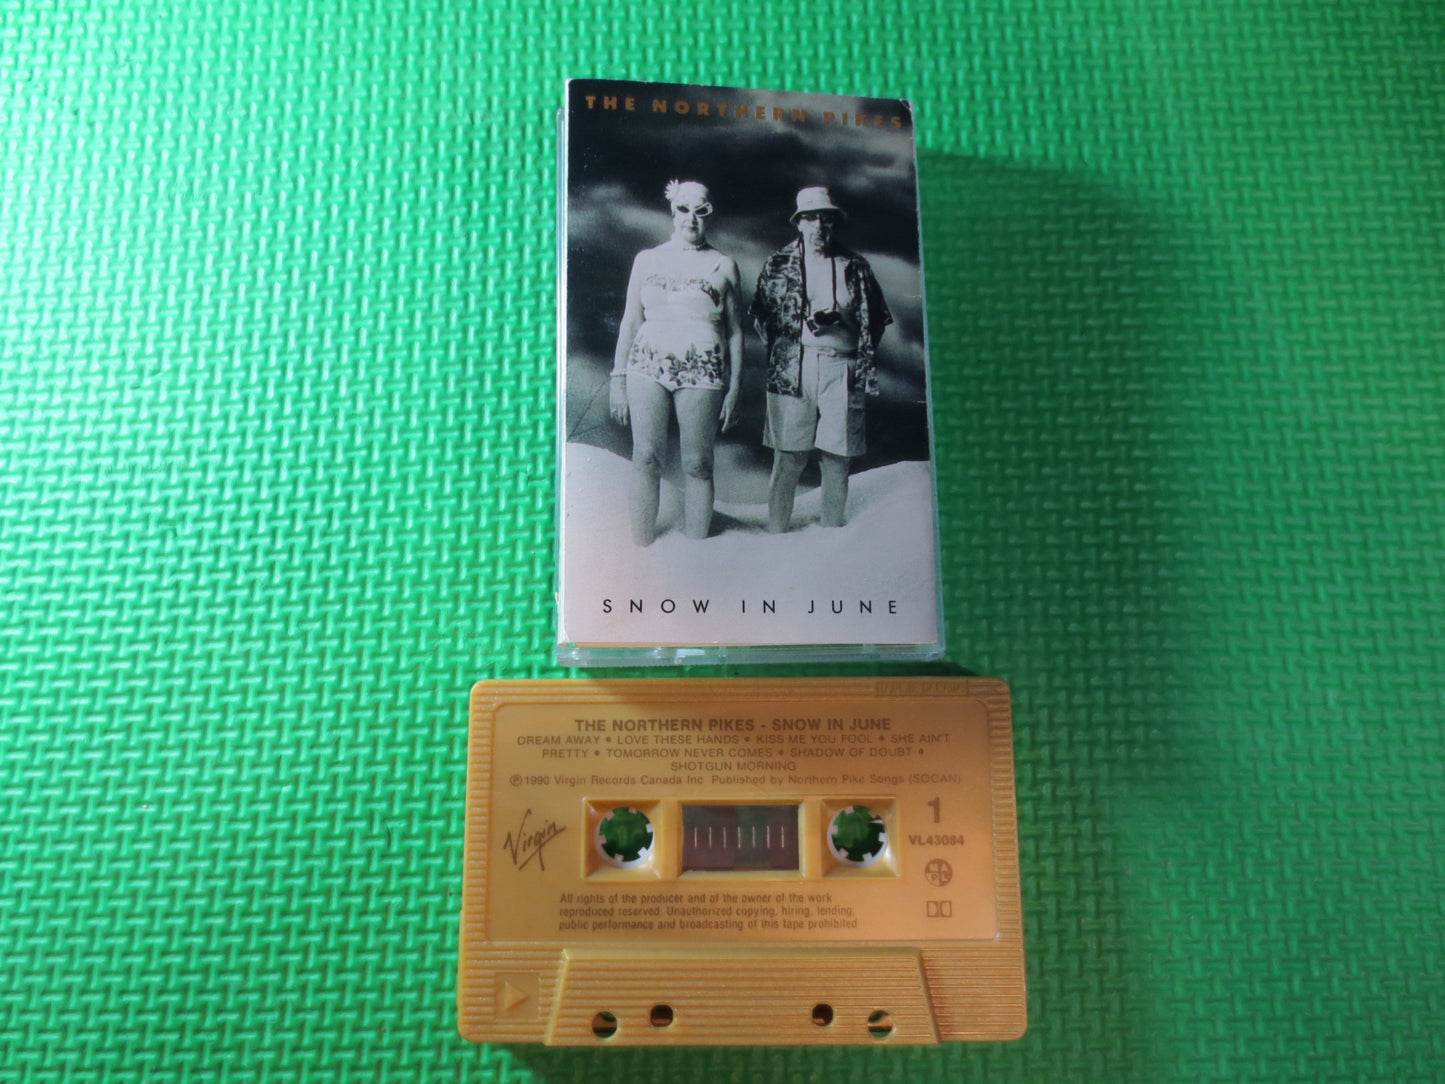 NORTHERN PIKES Tape, SNOW in June Tape, Northern Pikes Album, Northern Pikes Lp, Tape Cassette, Cassette, 1990 Cassette